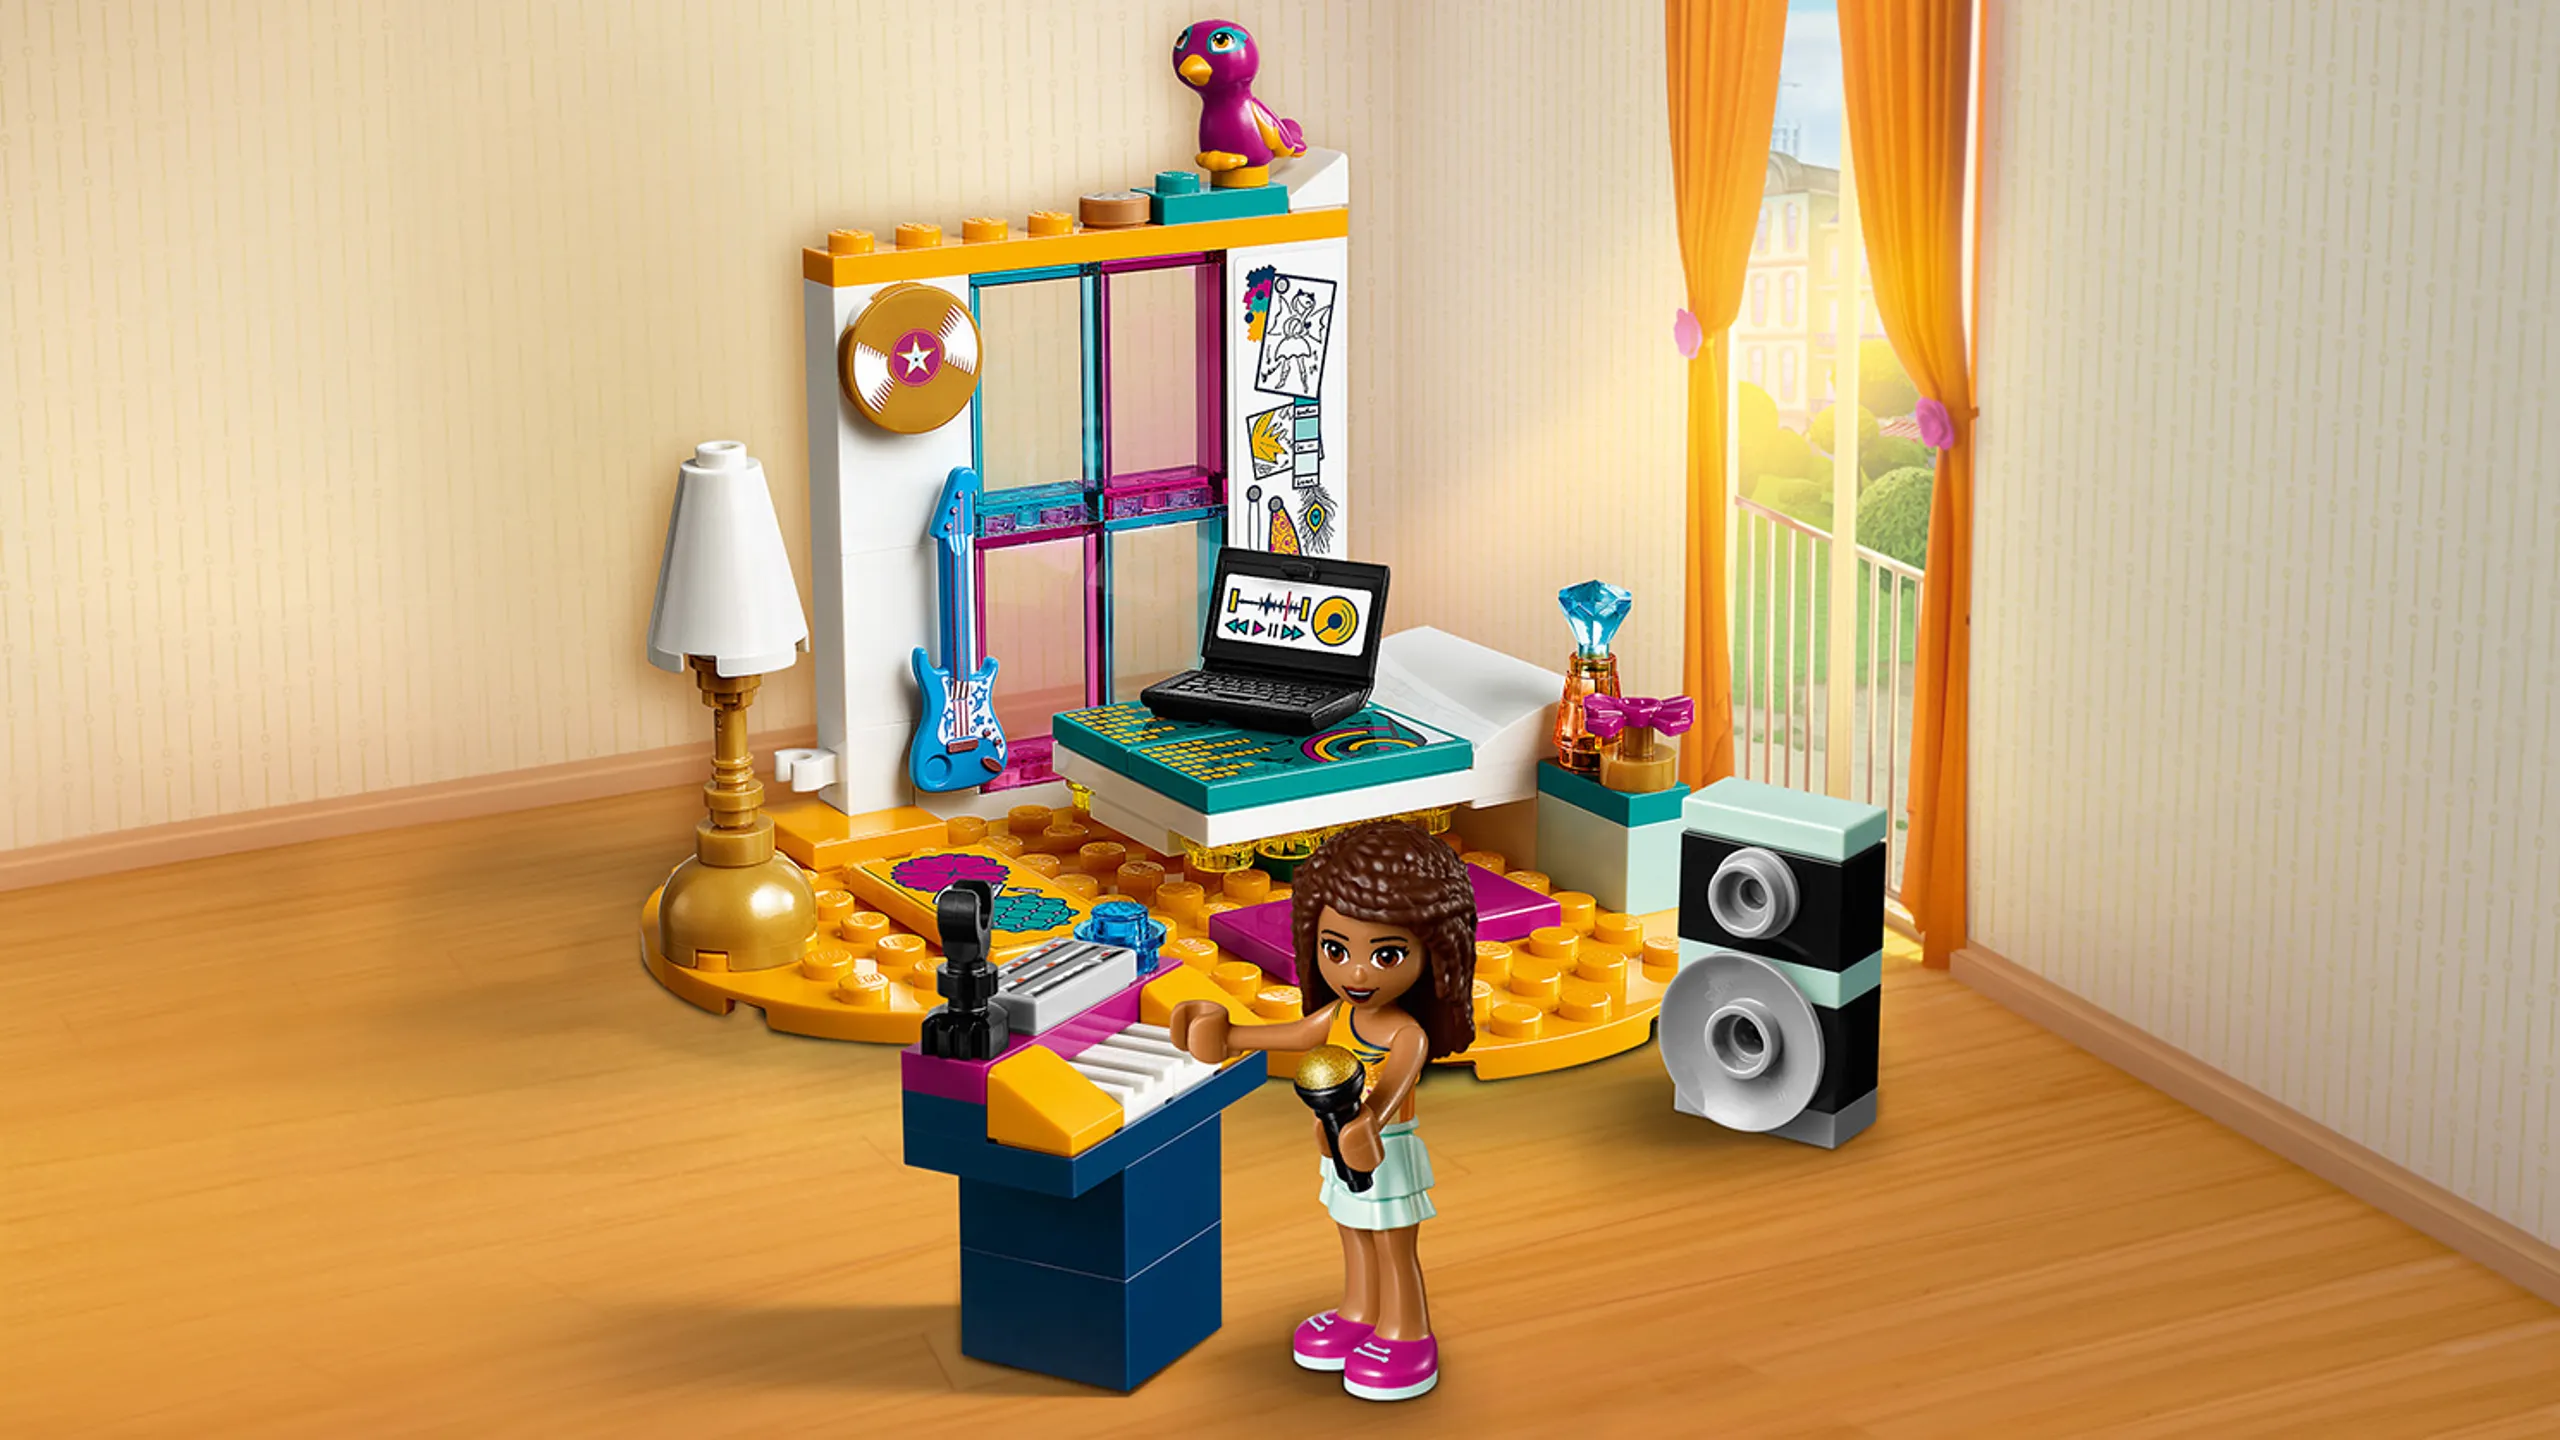 LEGO Friends - 41341 Andrea's Bedroom - Play on the piano or guitar and record a song with Andrea in her musical bedroom in orange and pink colors.